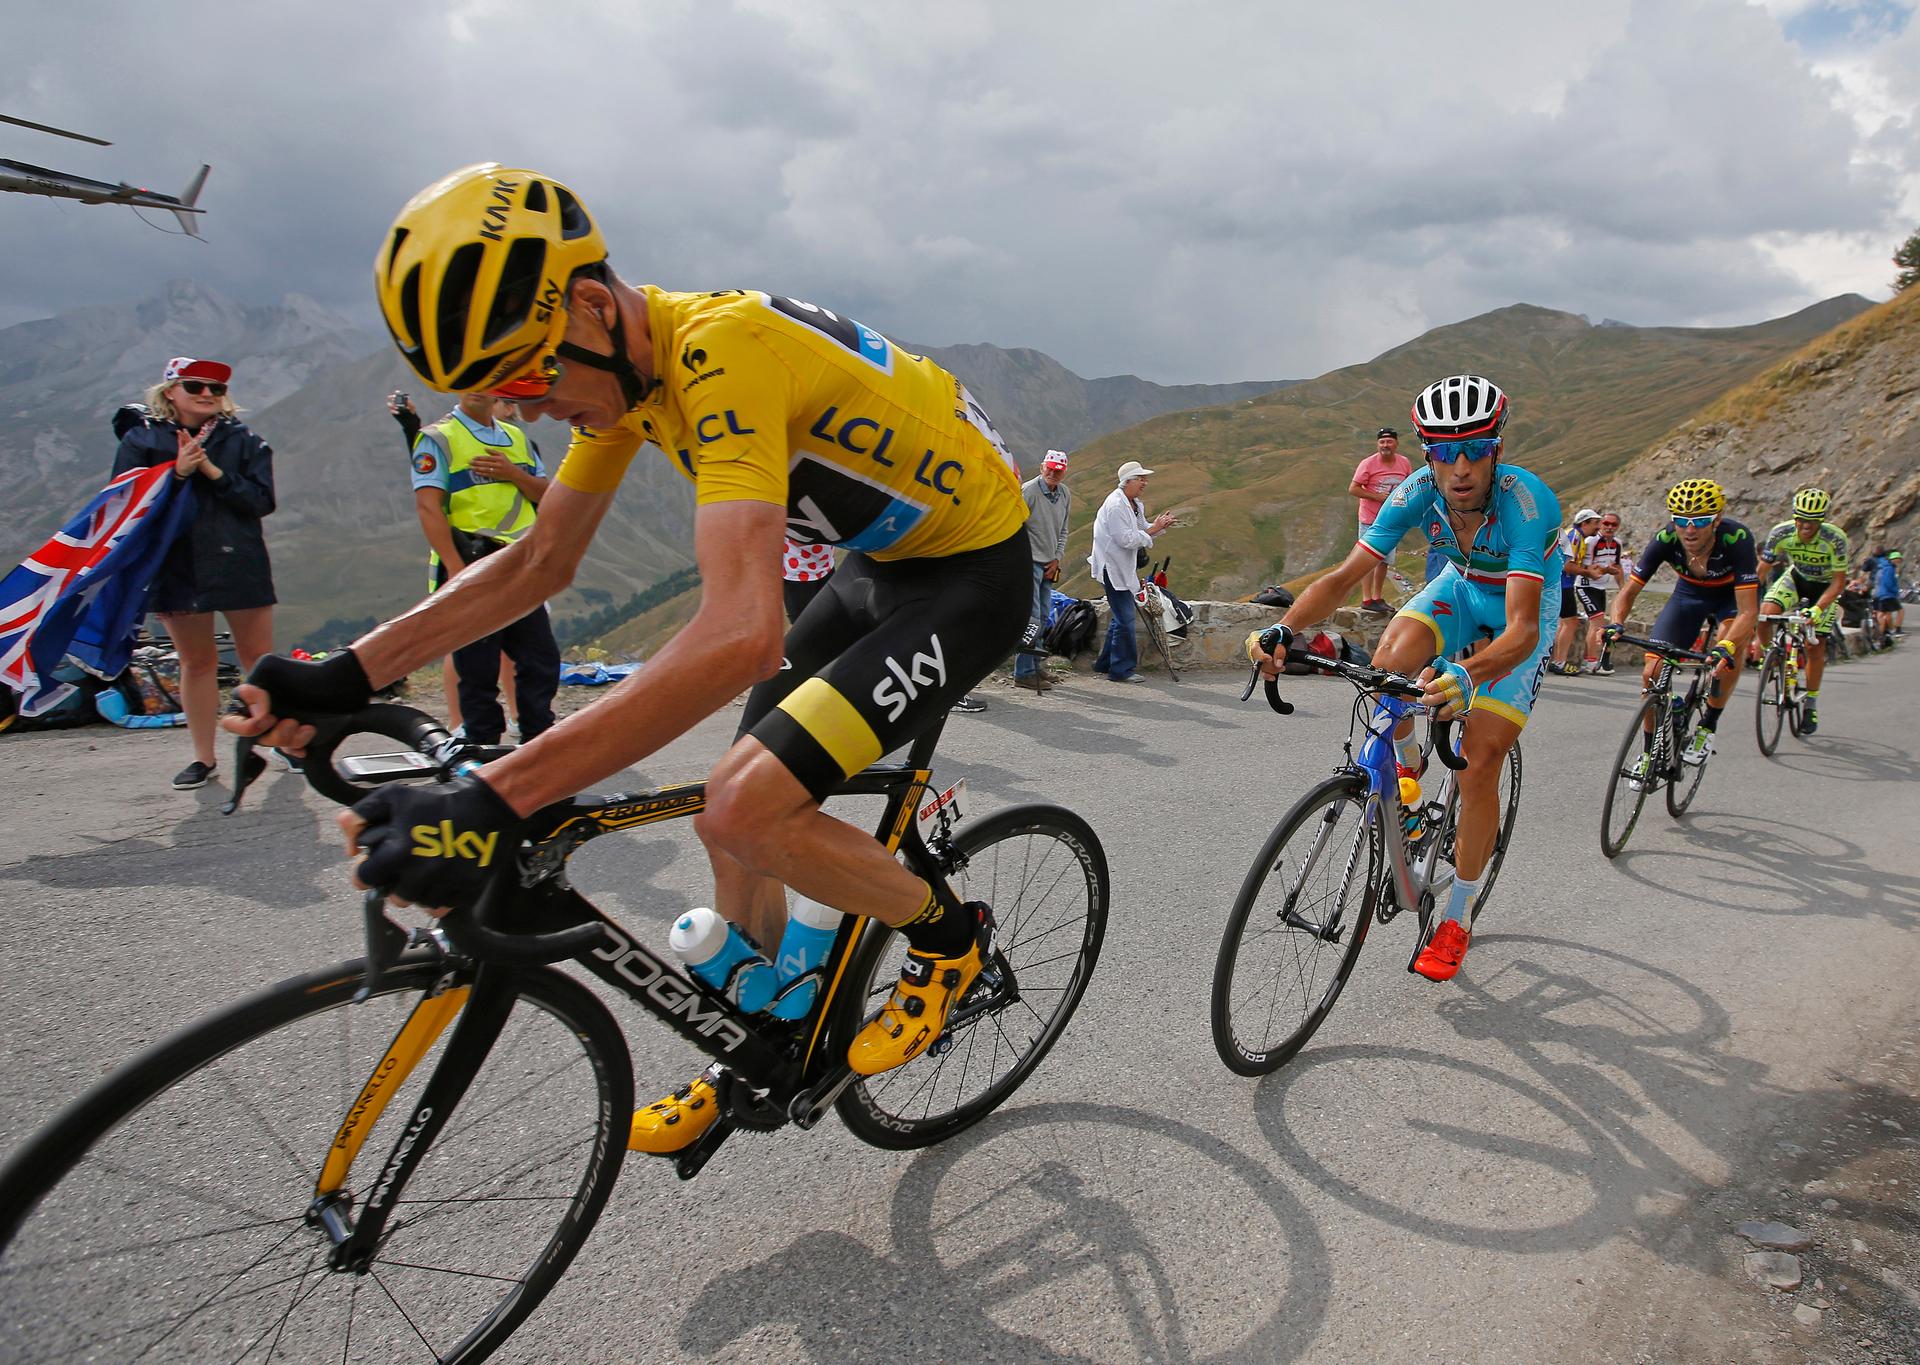 Team Sky rider Chris Froome of Britain (L), race leader's yellow jersey, climbs the Allos pass followed by Astana rider Vincenzo Nibali of Italy during the 161-km (100 miles) 17th stage of the 102nd Tour de France cycling race from Digne-les-Bains to Pra 